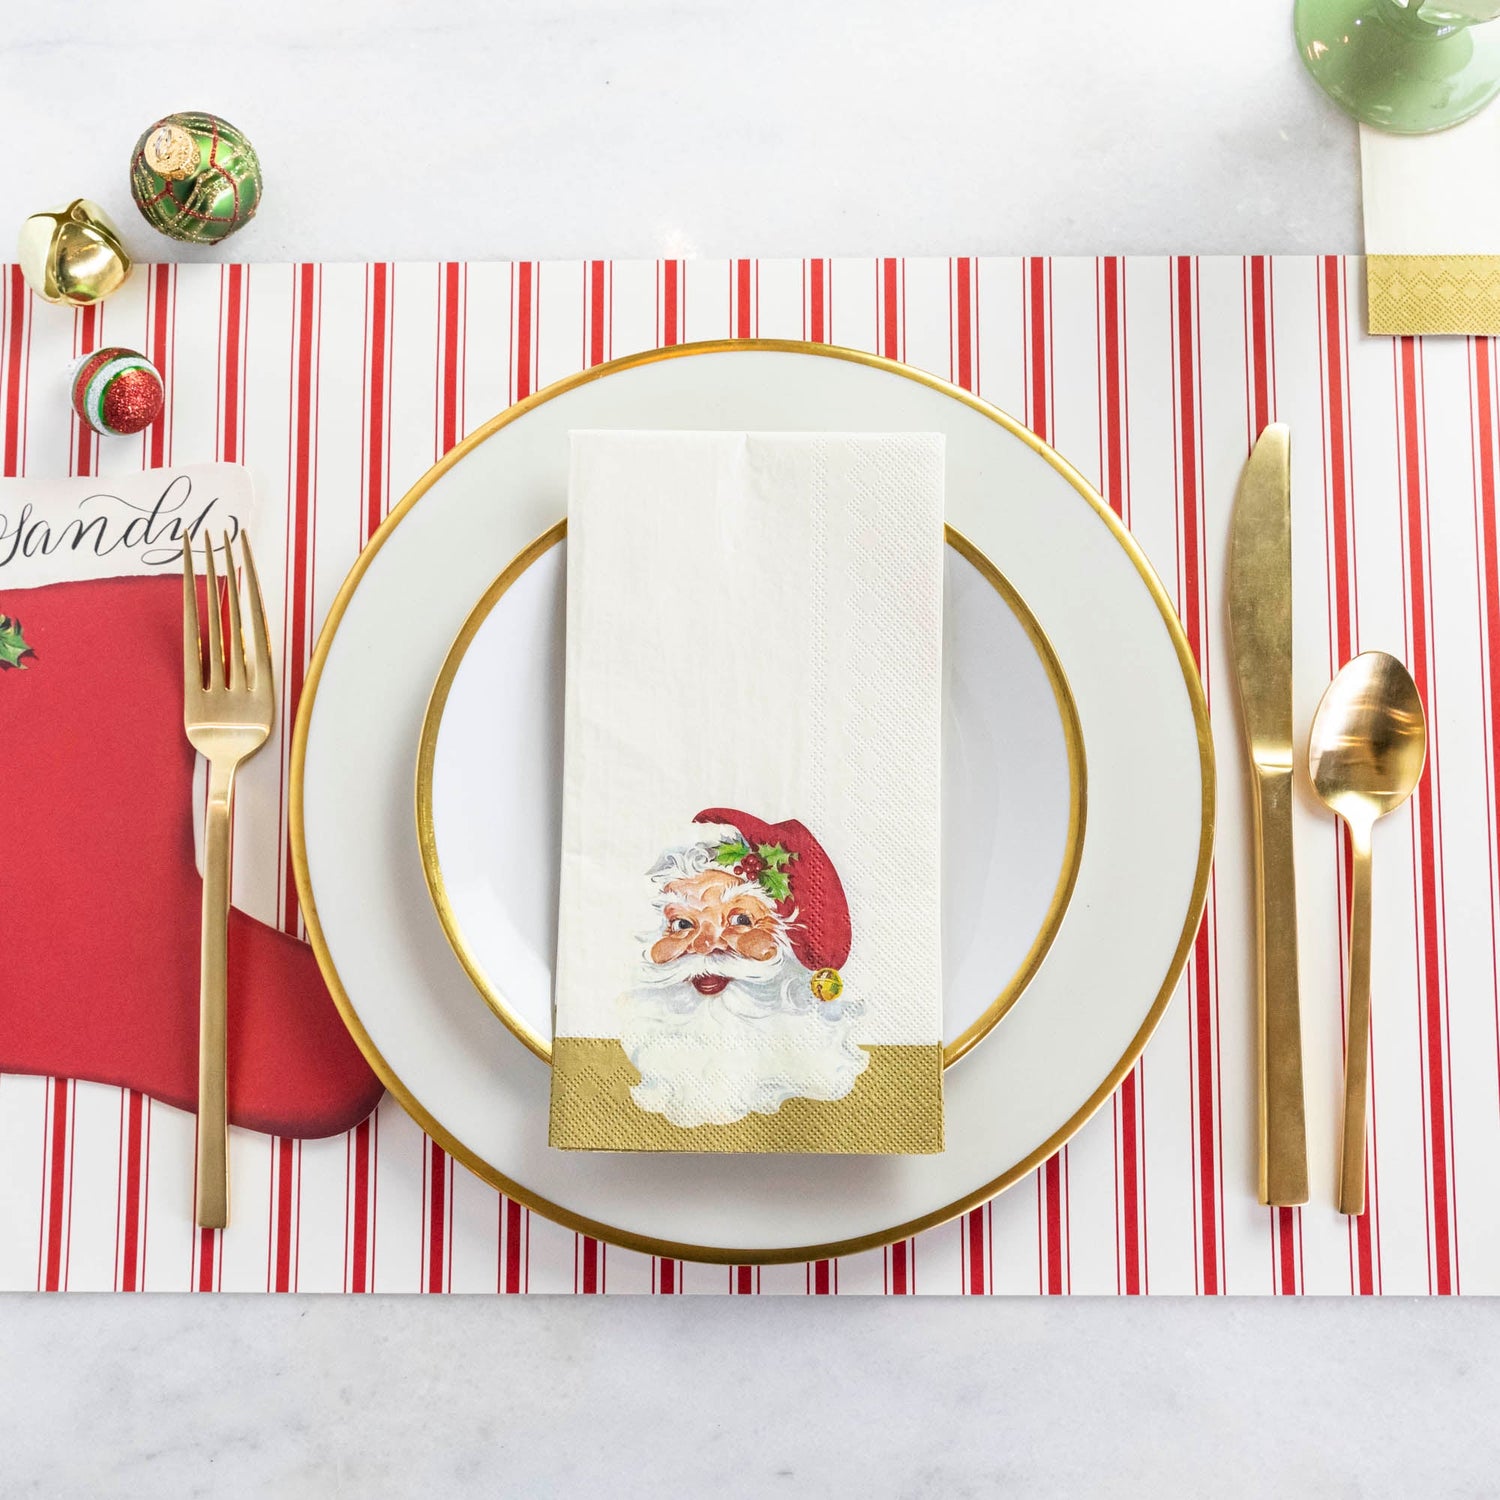 A Santa Guest Napkin centered on a plate in a Christmas place setting, from above.